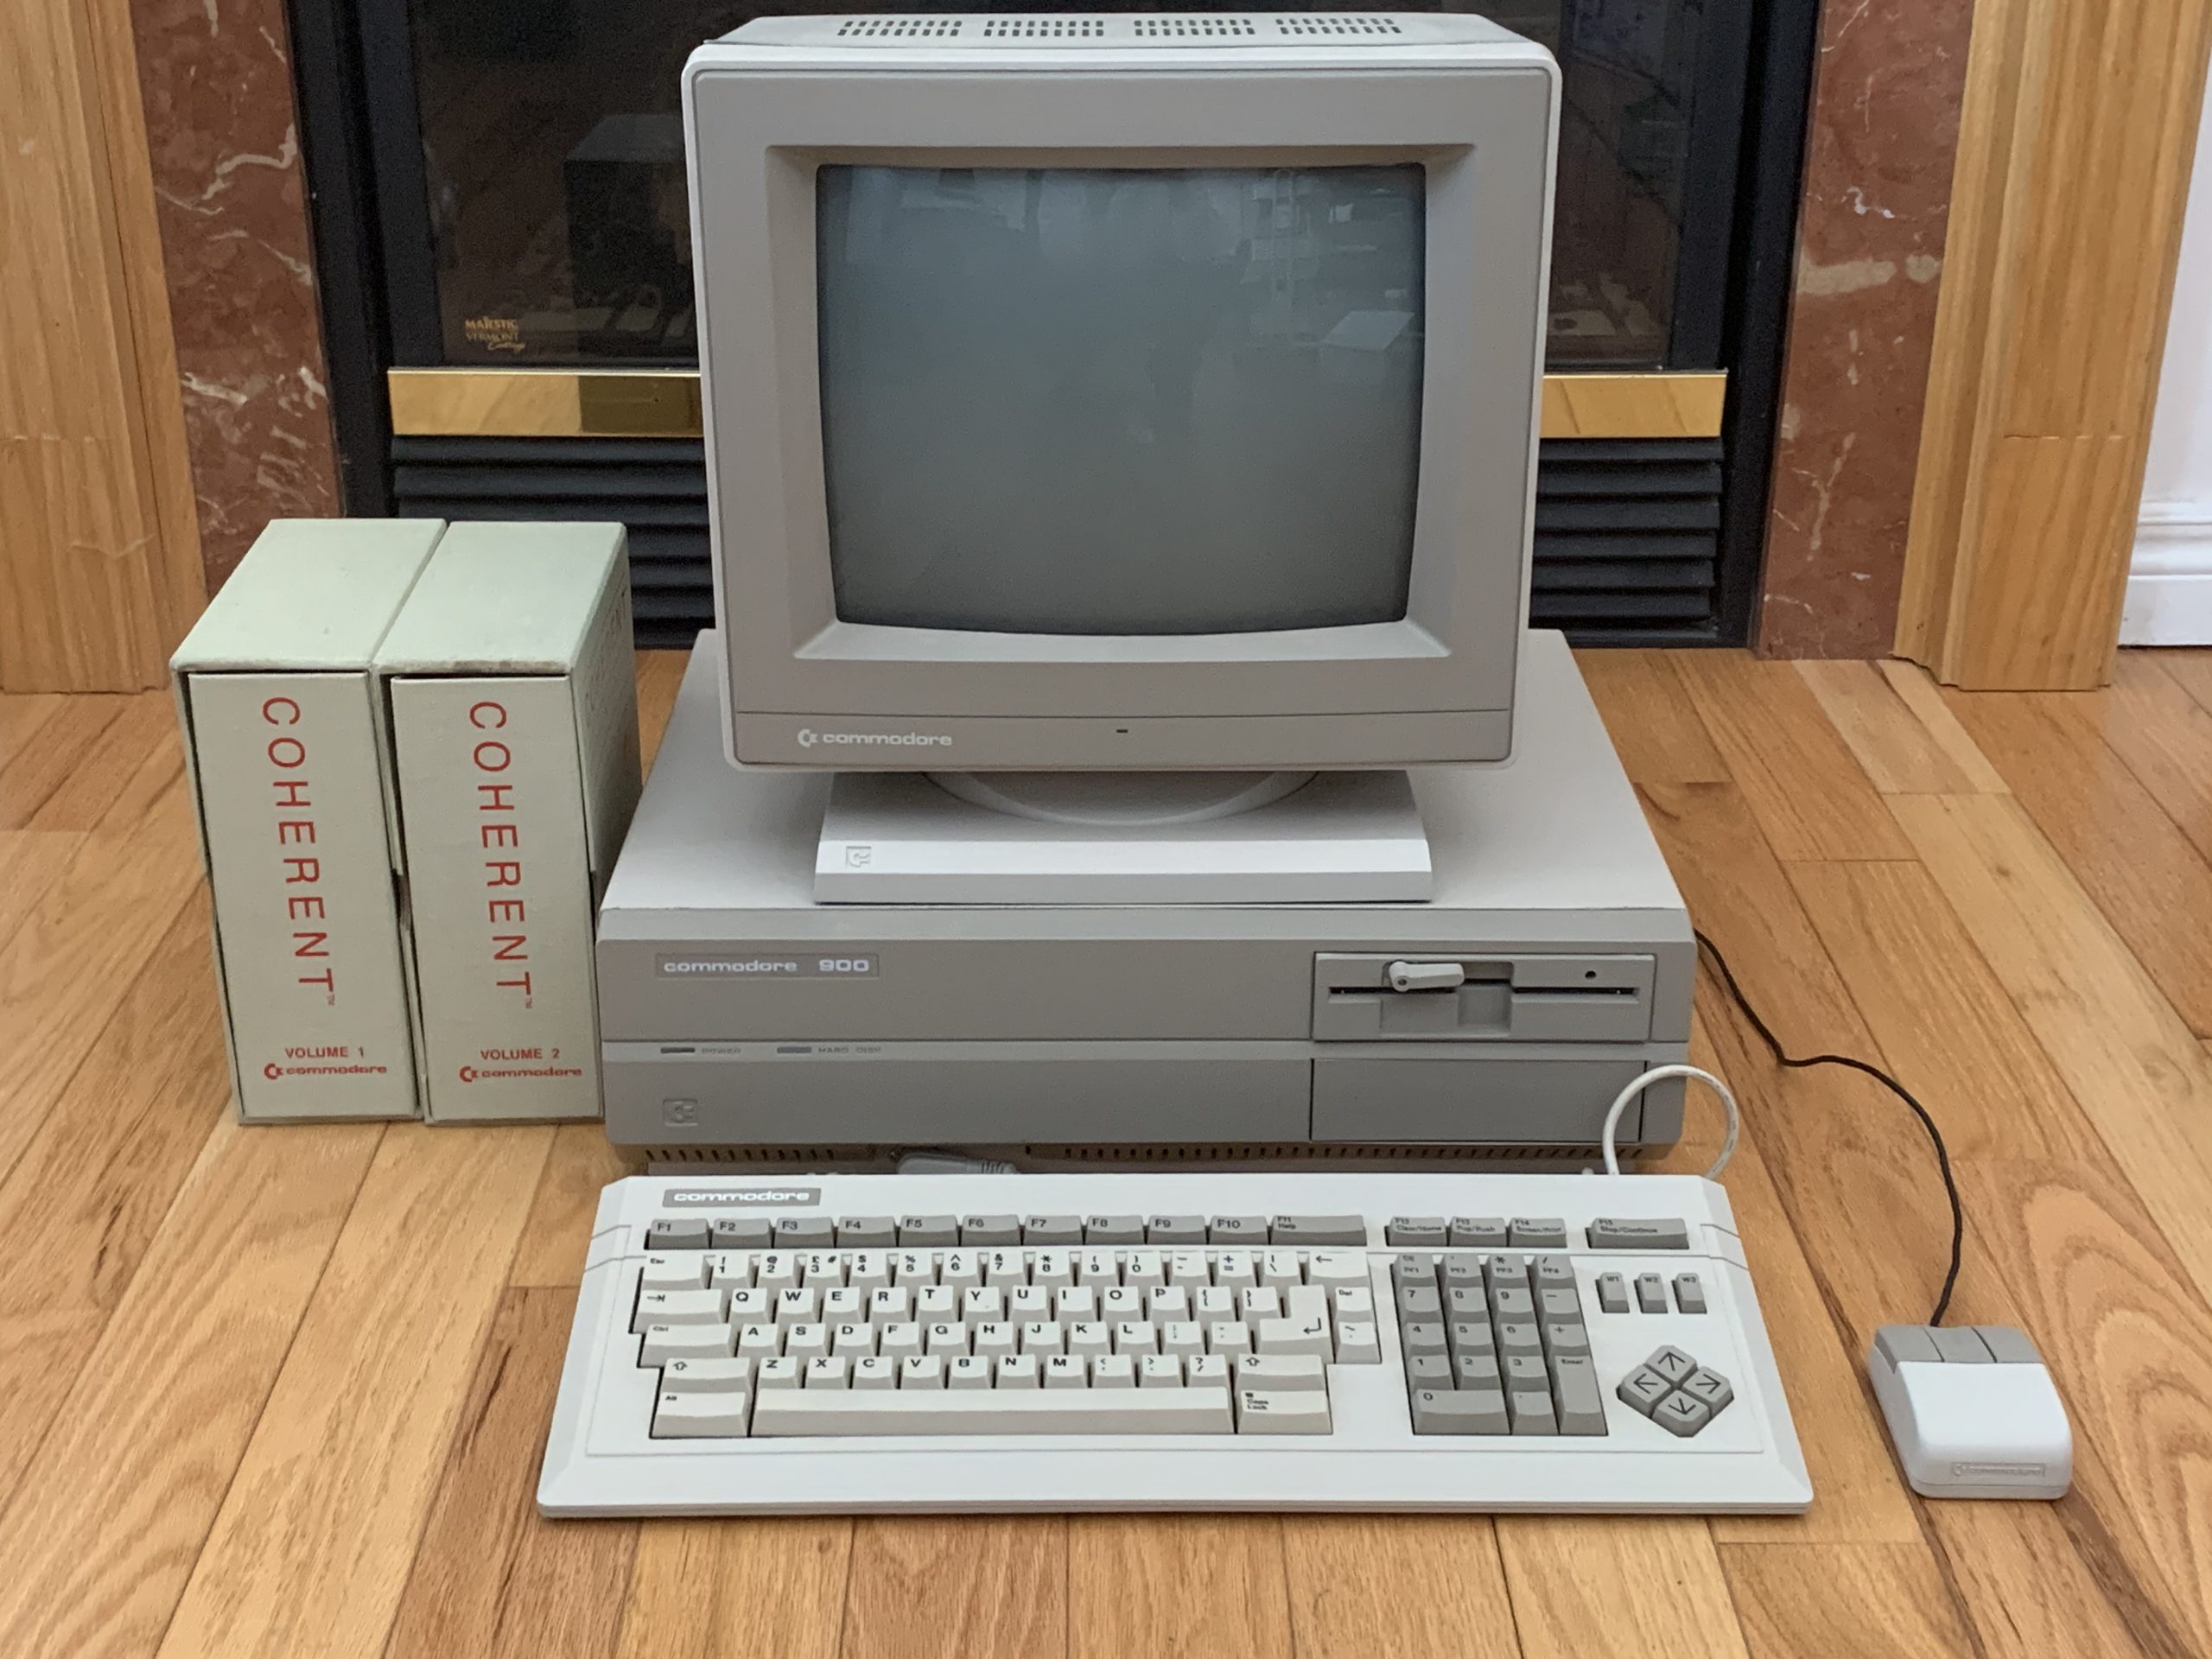 Commodore 900: The Unix-like workstation/server that was eclipsed by Amiga  –